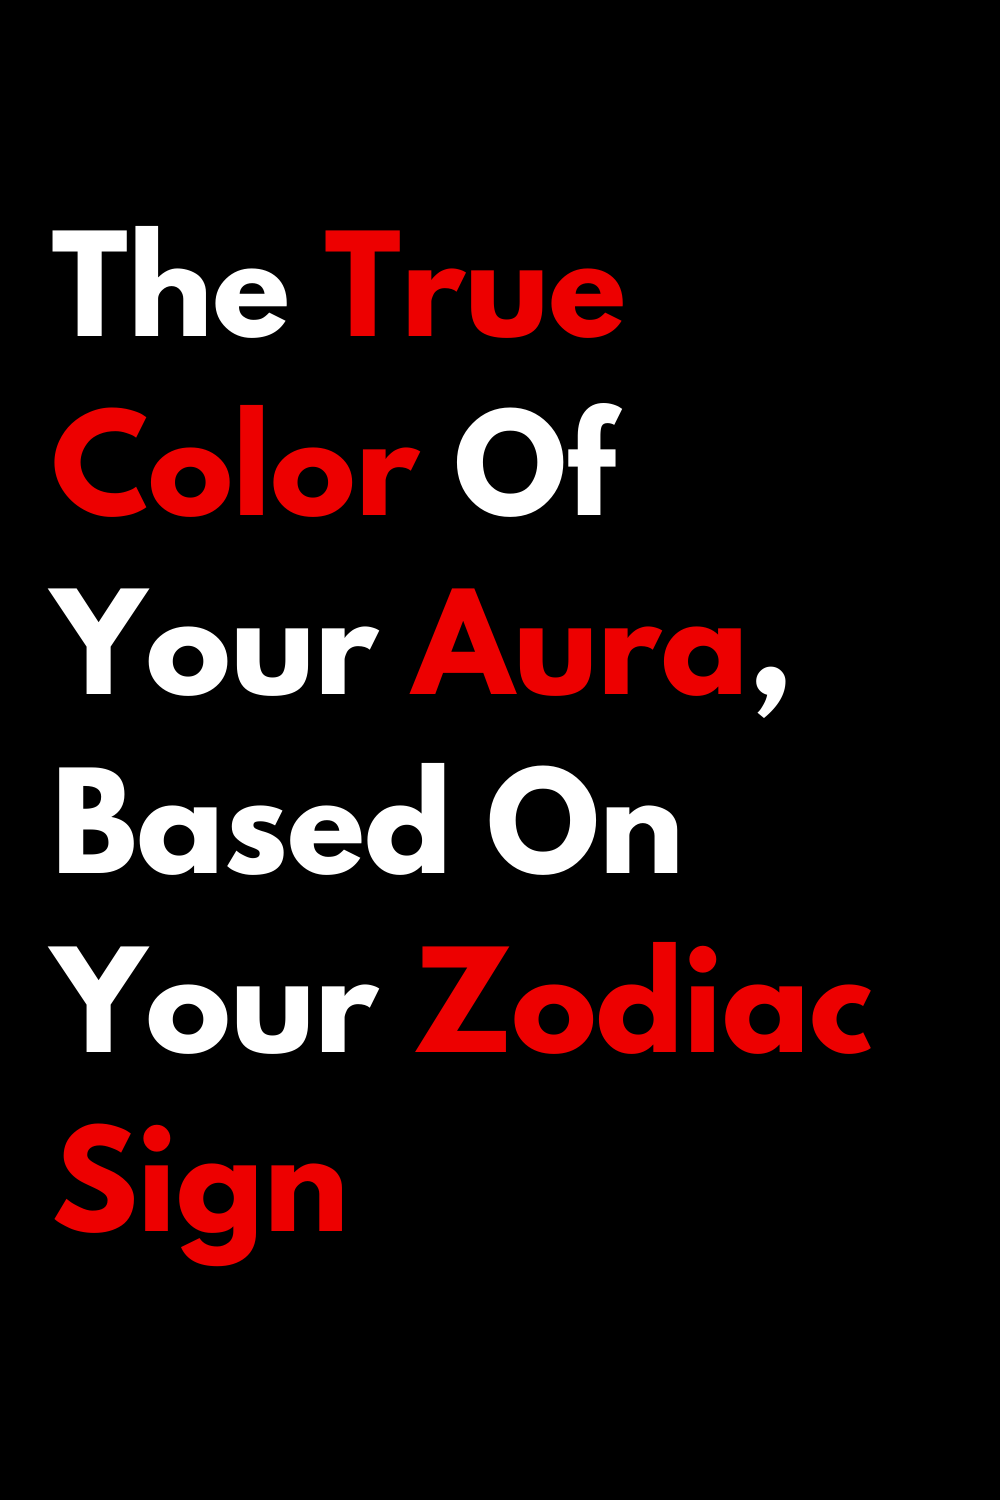 The True Color Of Your Aura, Based On Your Zodiac Sign